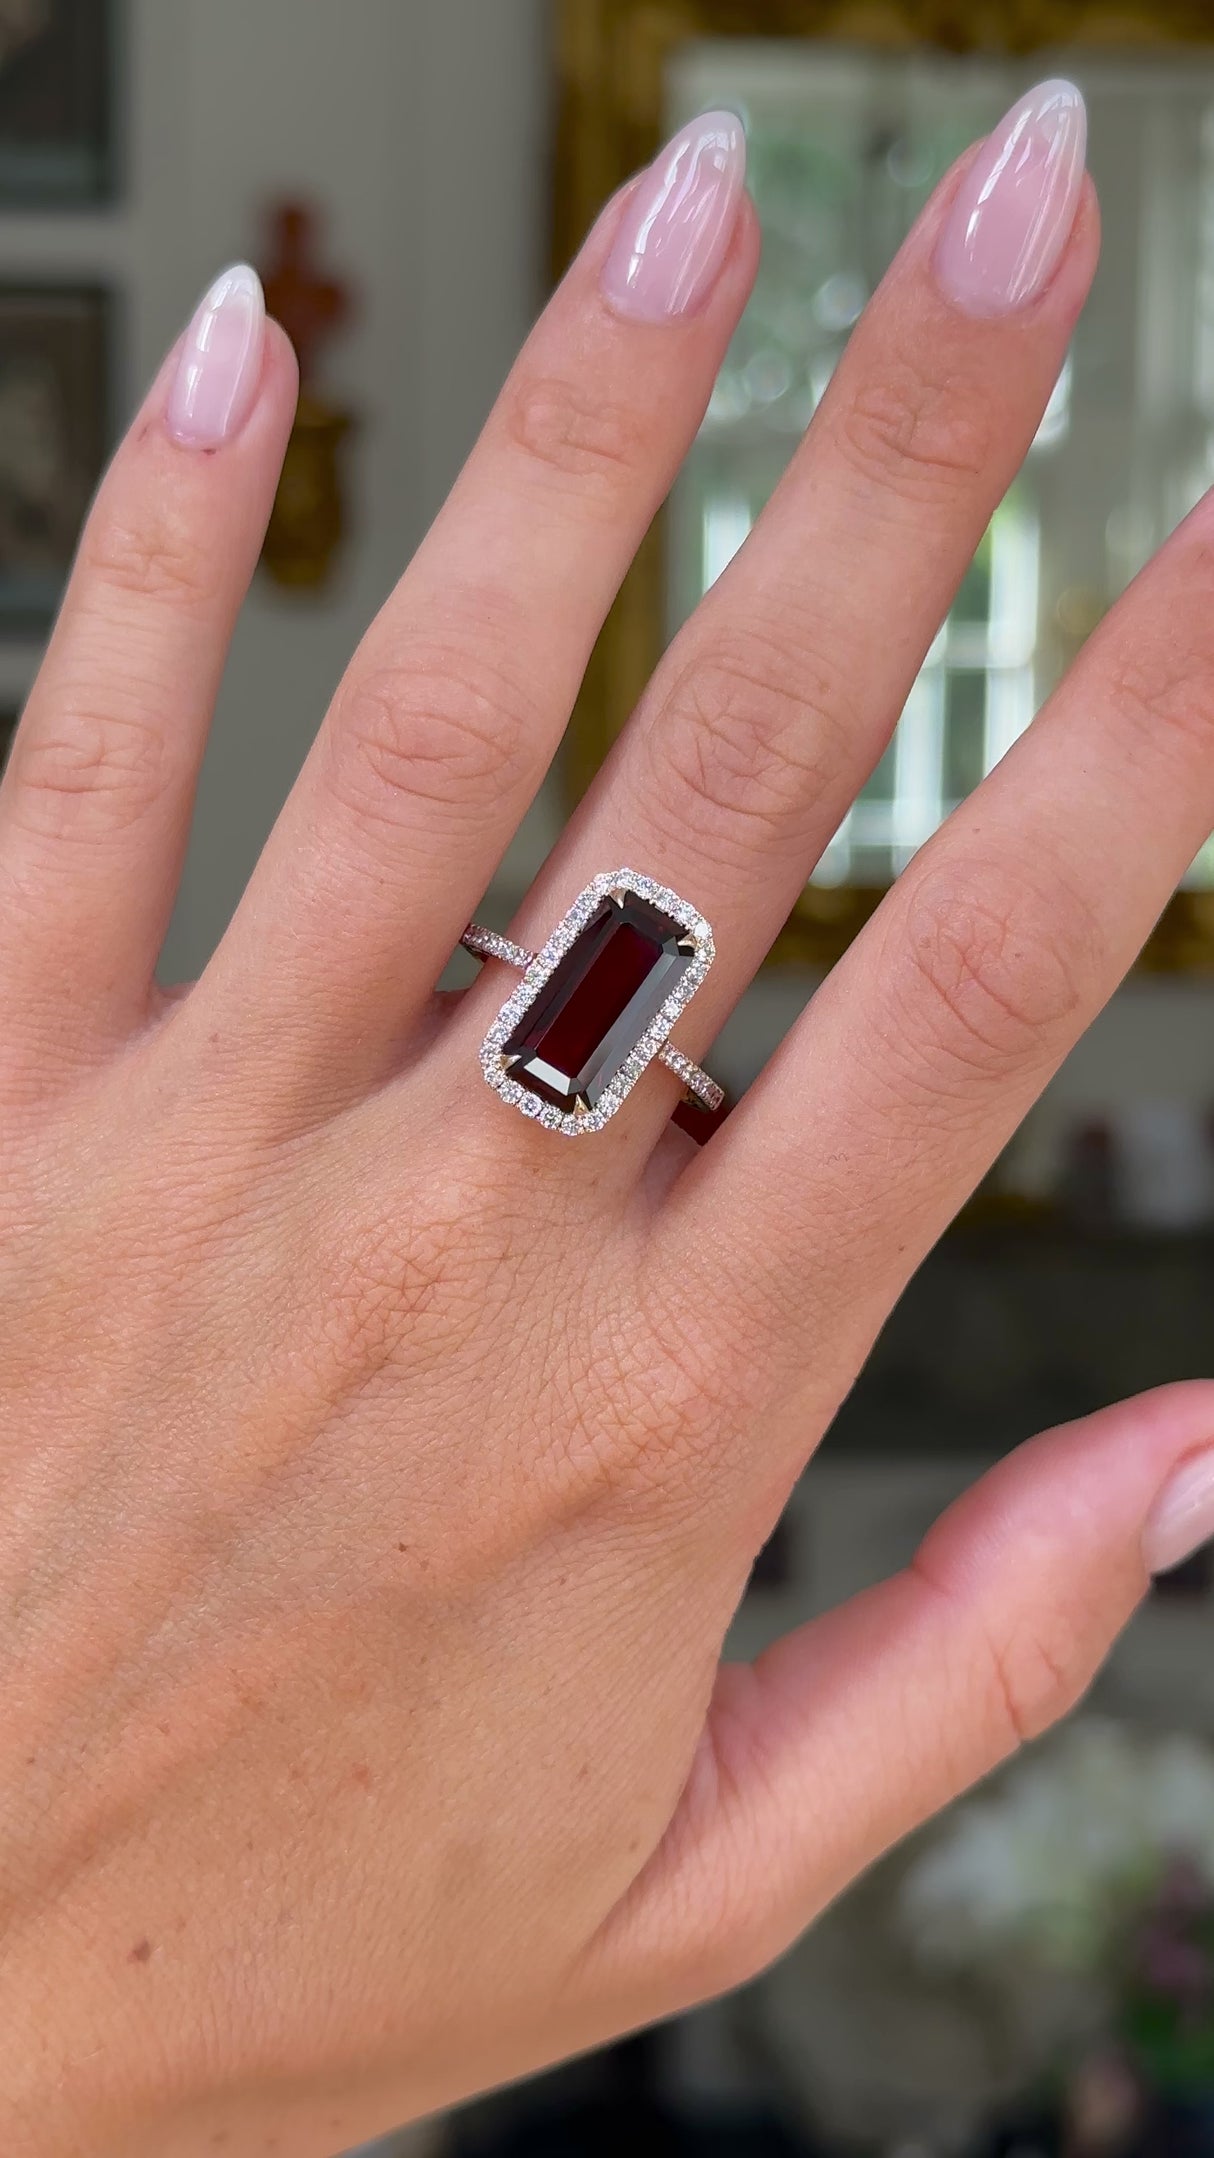 red garnet and diamond cluster ring worn on hand and moved away from lens to give perspective.